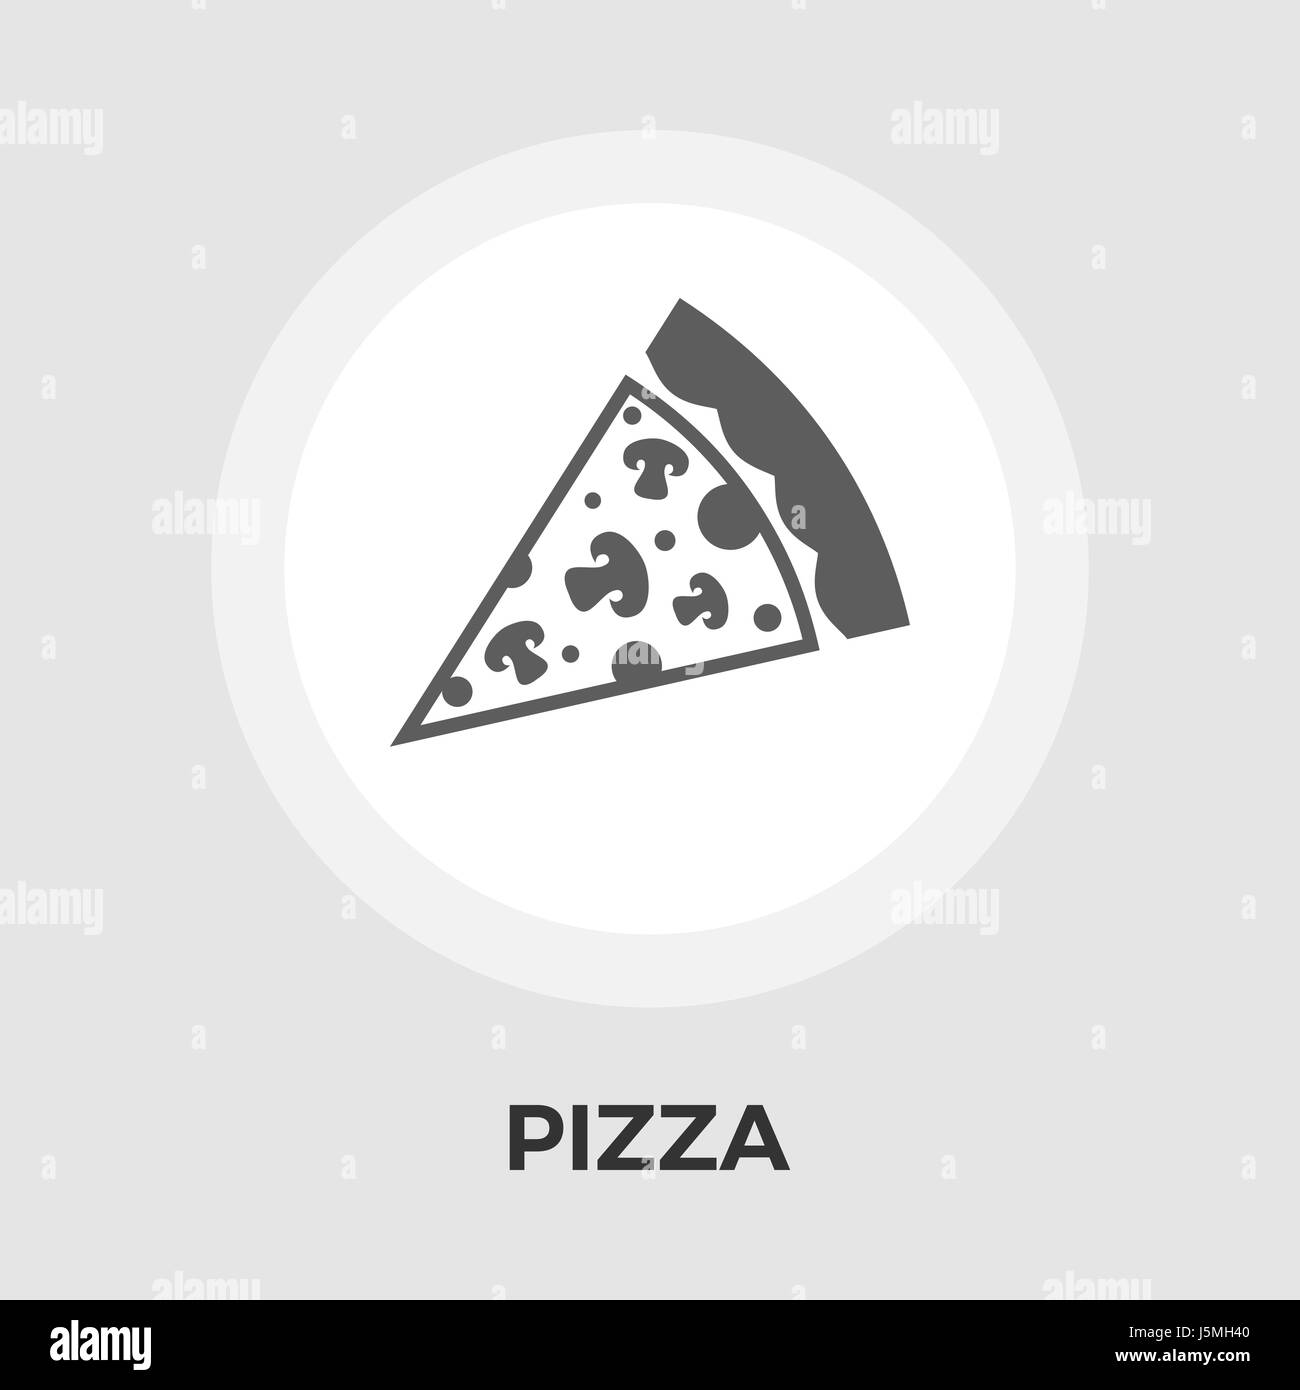 Pizza icon vector. Flat icon isolated on the white background. Editable EPS file. Vector illustration. Stock Vector